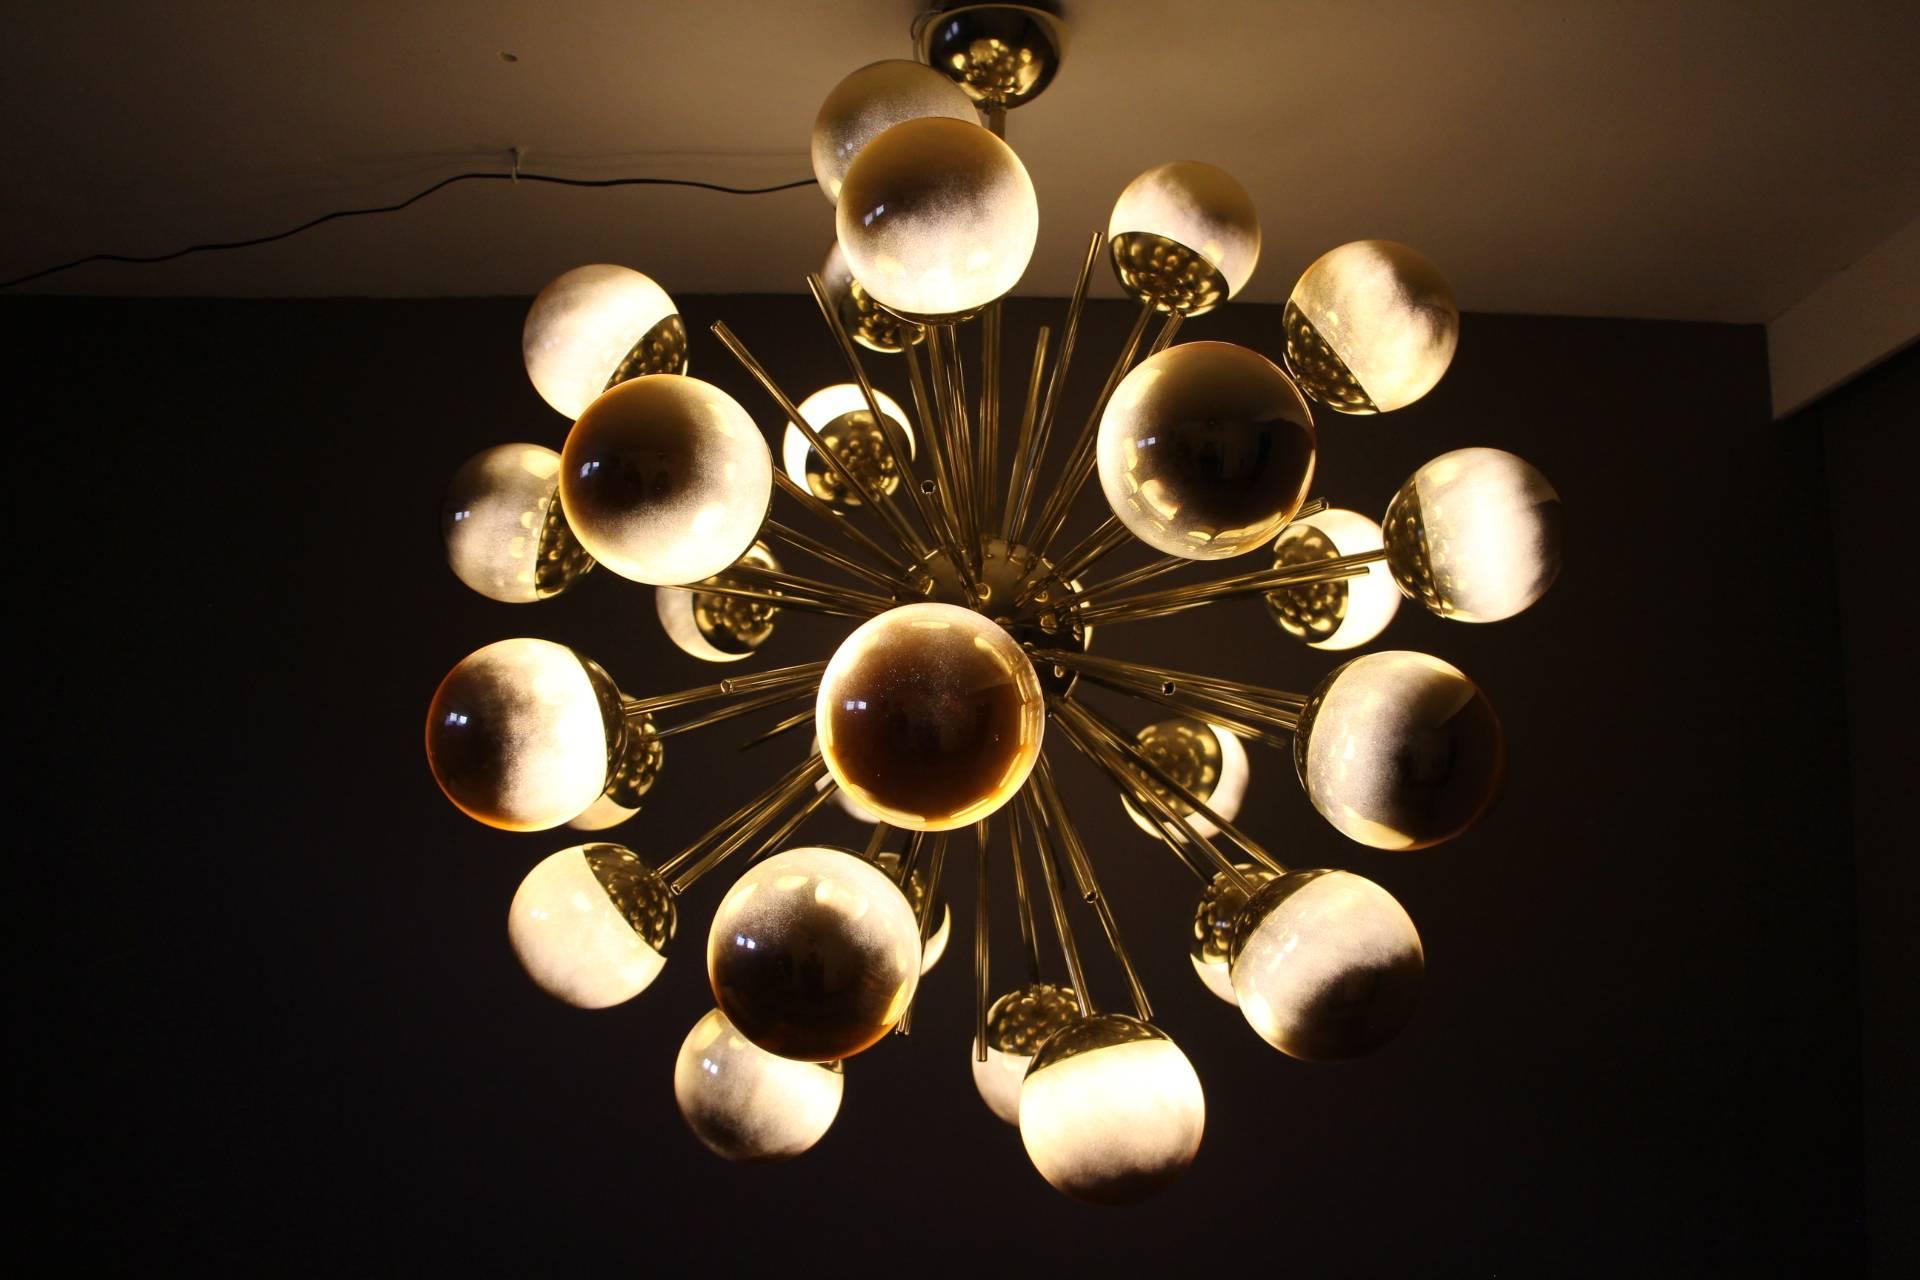 This very chic chandelier features brass rods ending with gold glass globes.
So when the light is switched off, this chandelier is all gold, amazing. And when light is switched on, each globe looks like a kind of planet, and light gets out around